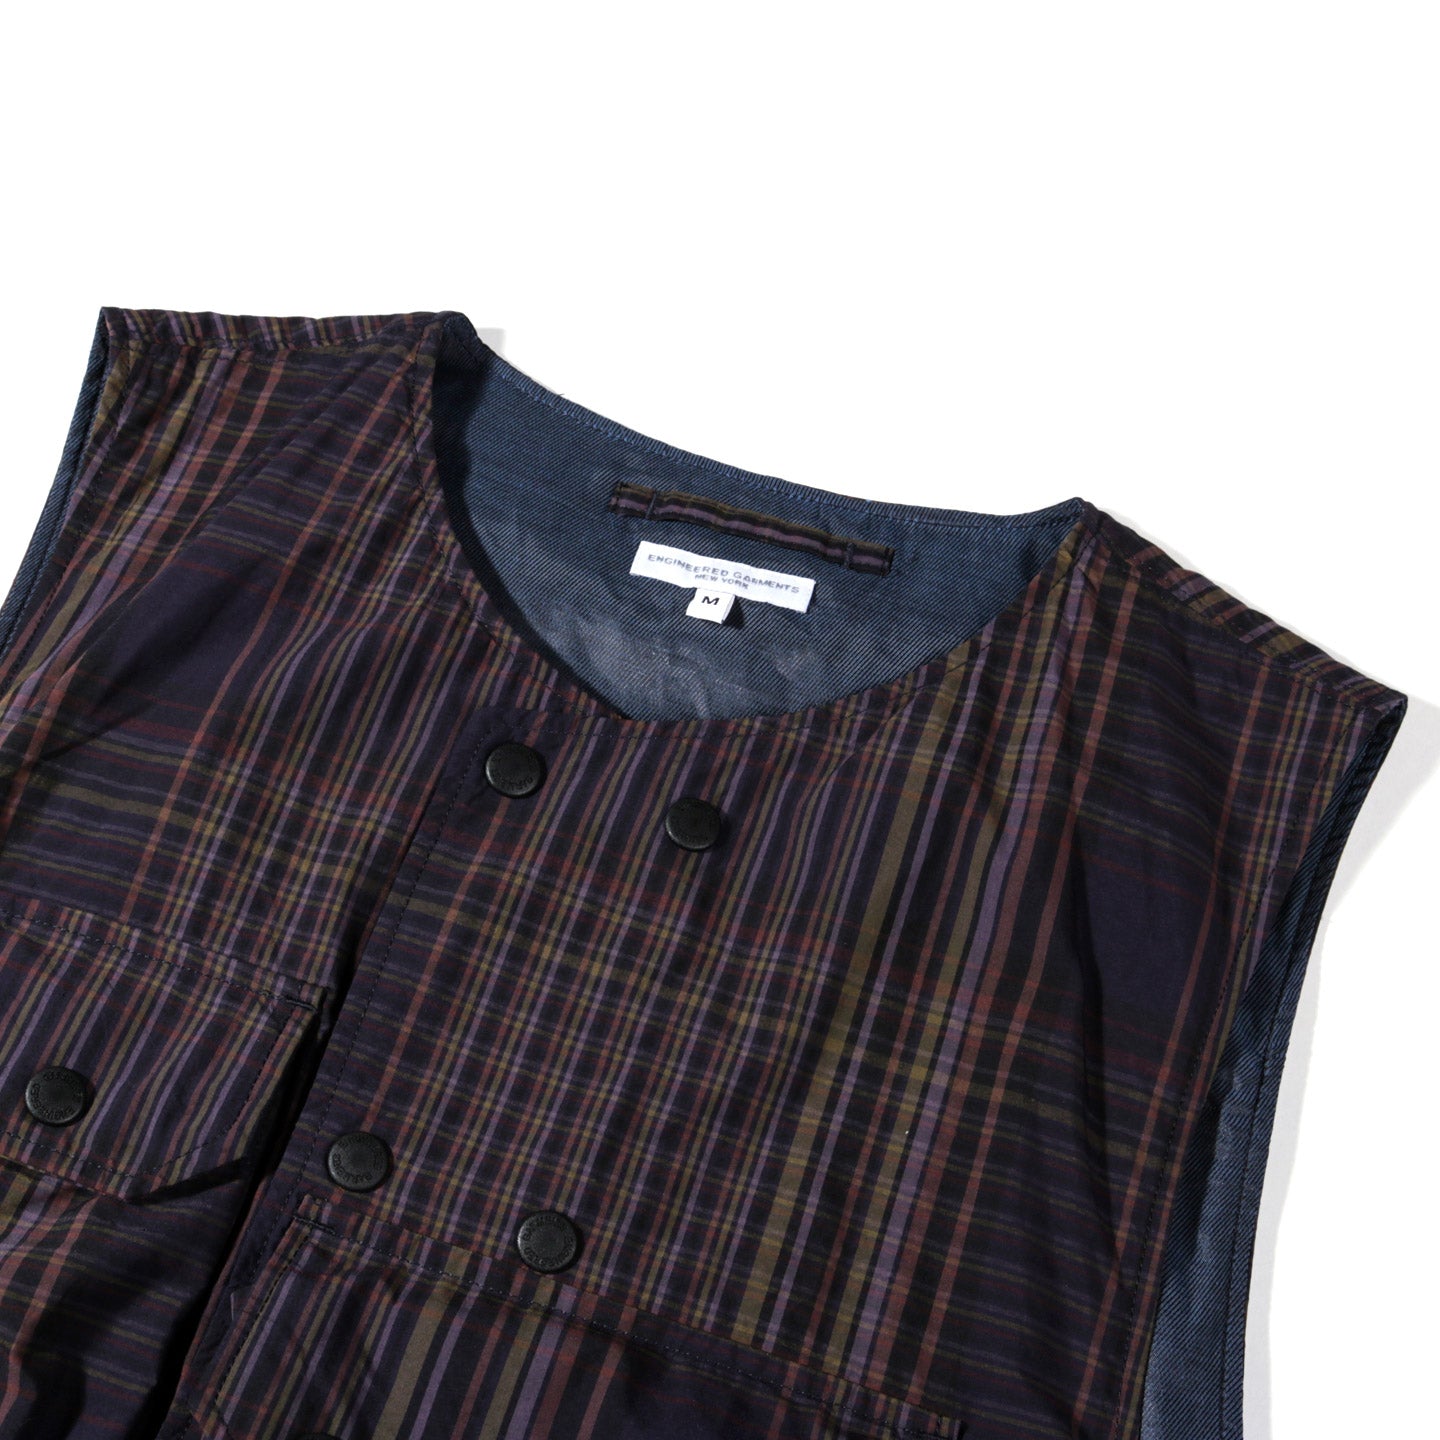 ENGINEERED GARMENTS COVER VEST MULTI COLOR NYCO PLAID